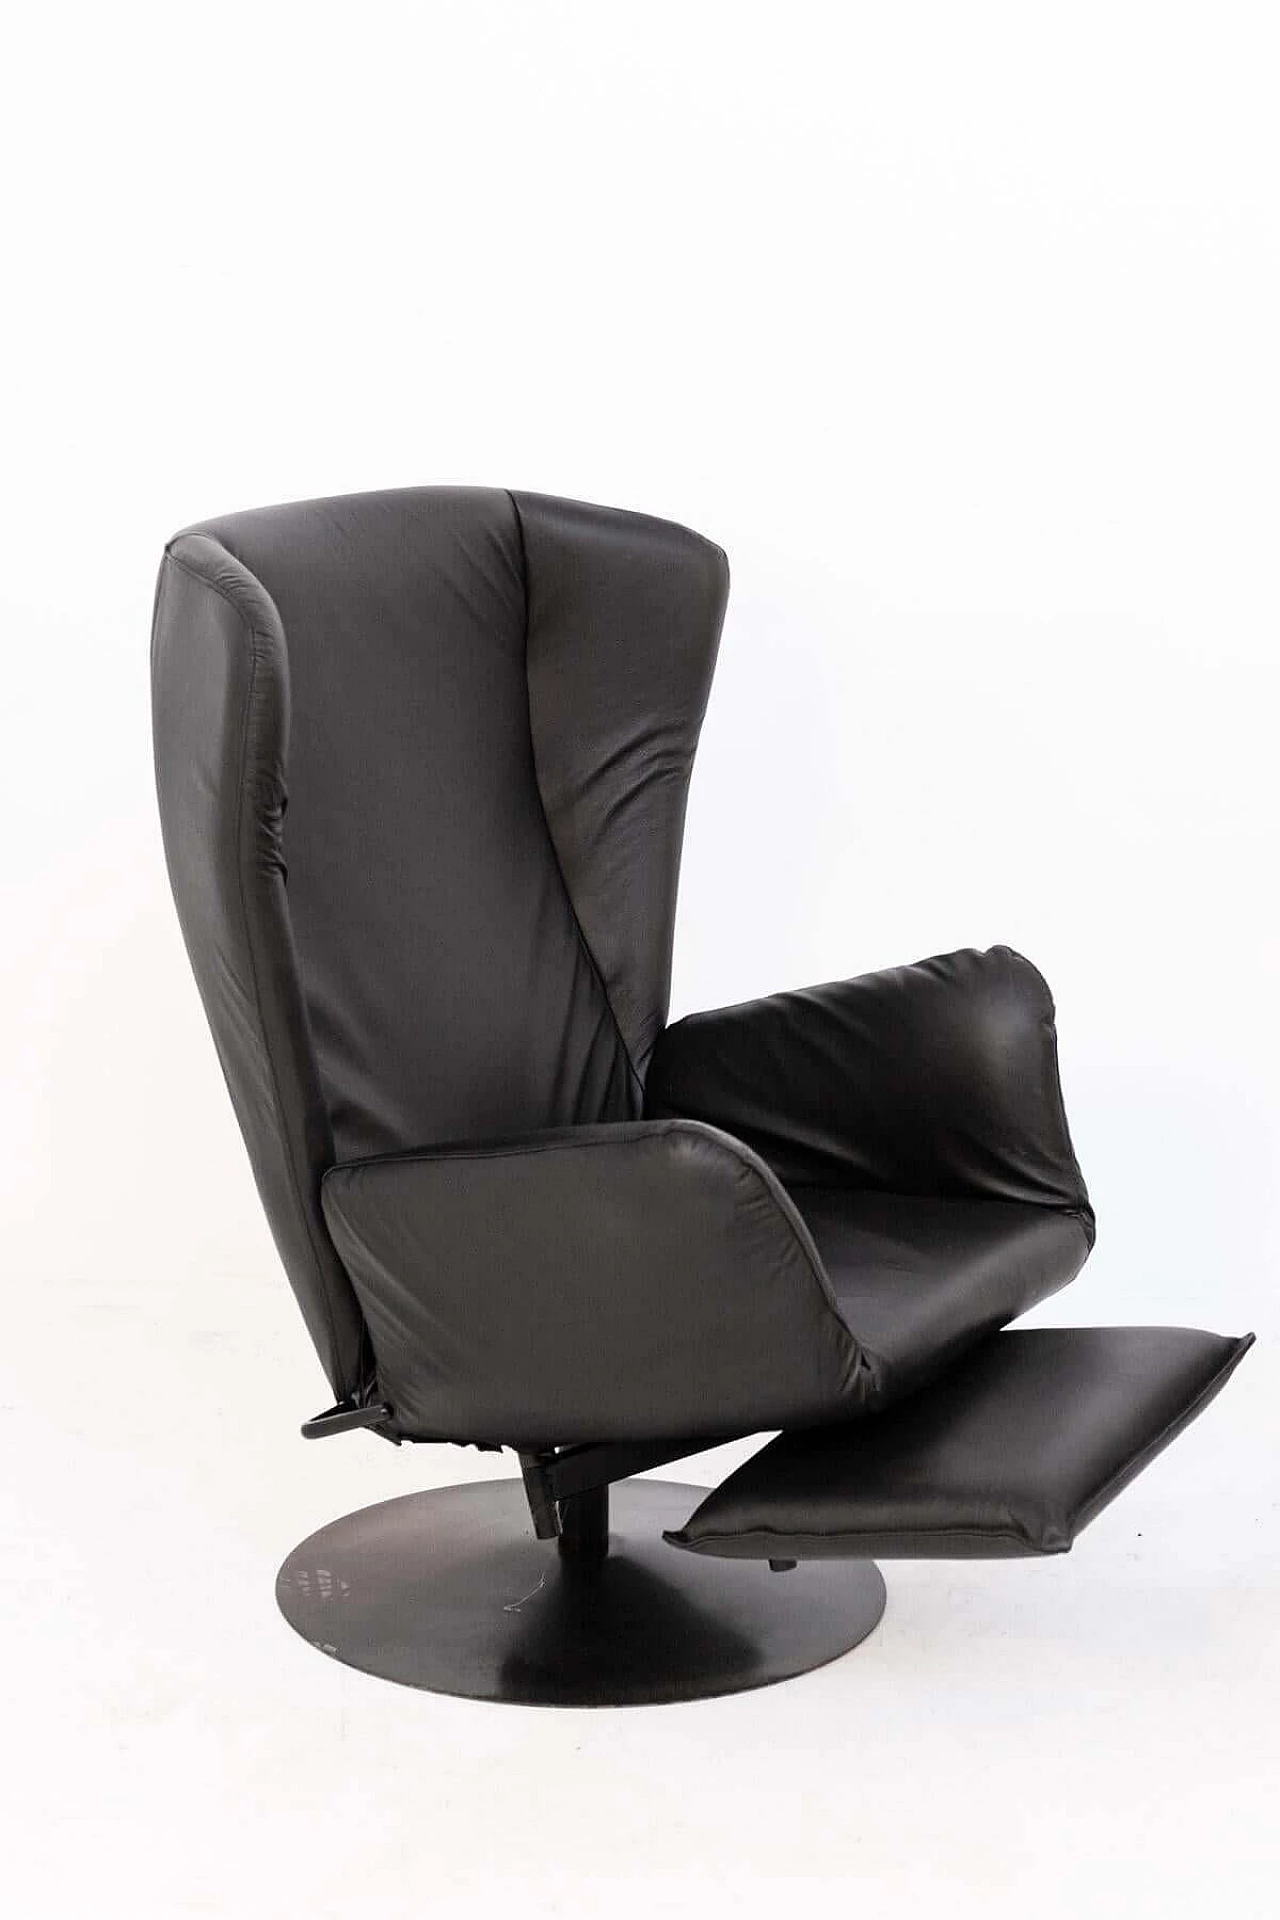 Pair of black leather armchairs with footrest cushion, 1970s 1405541